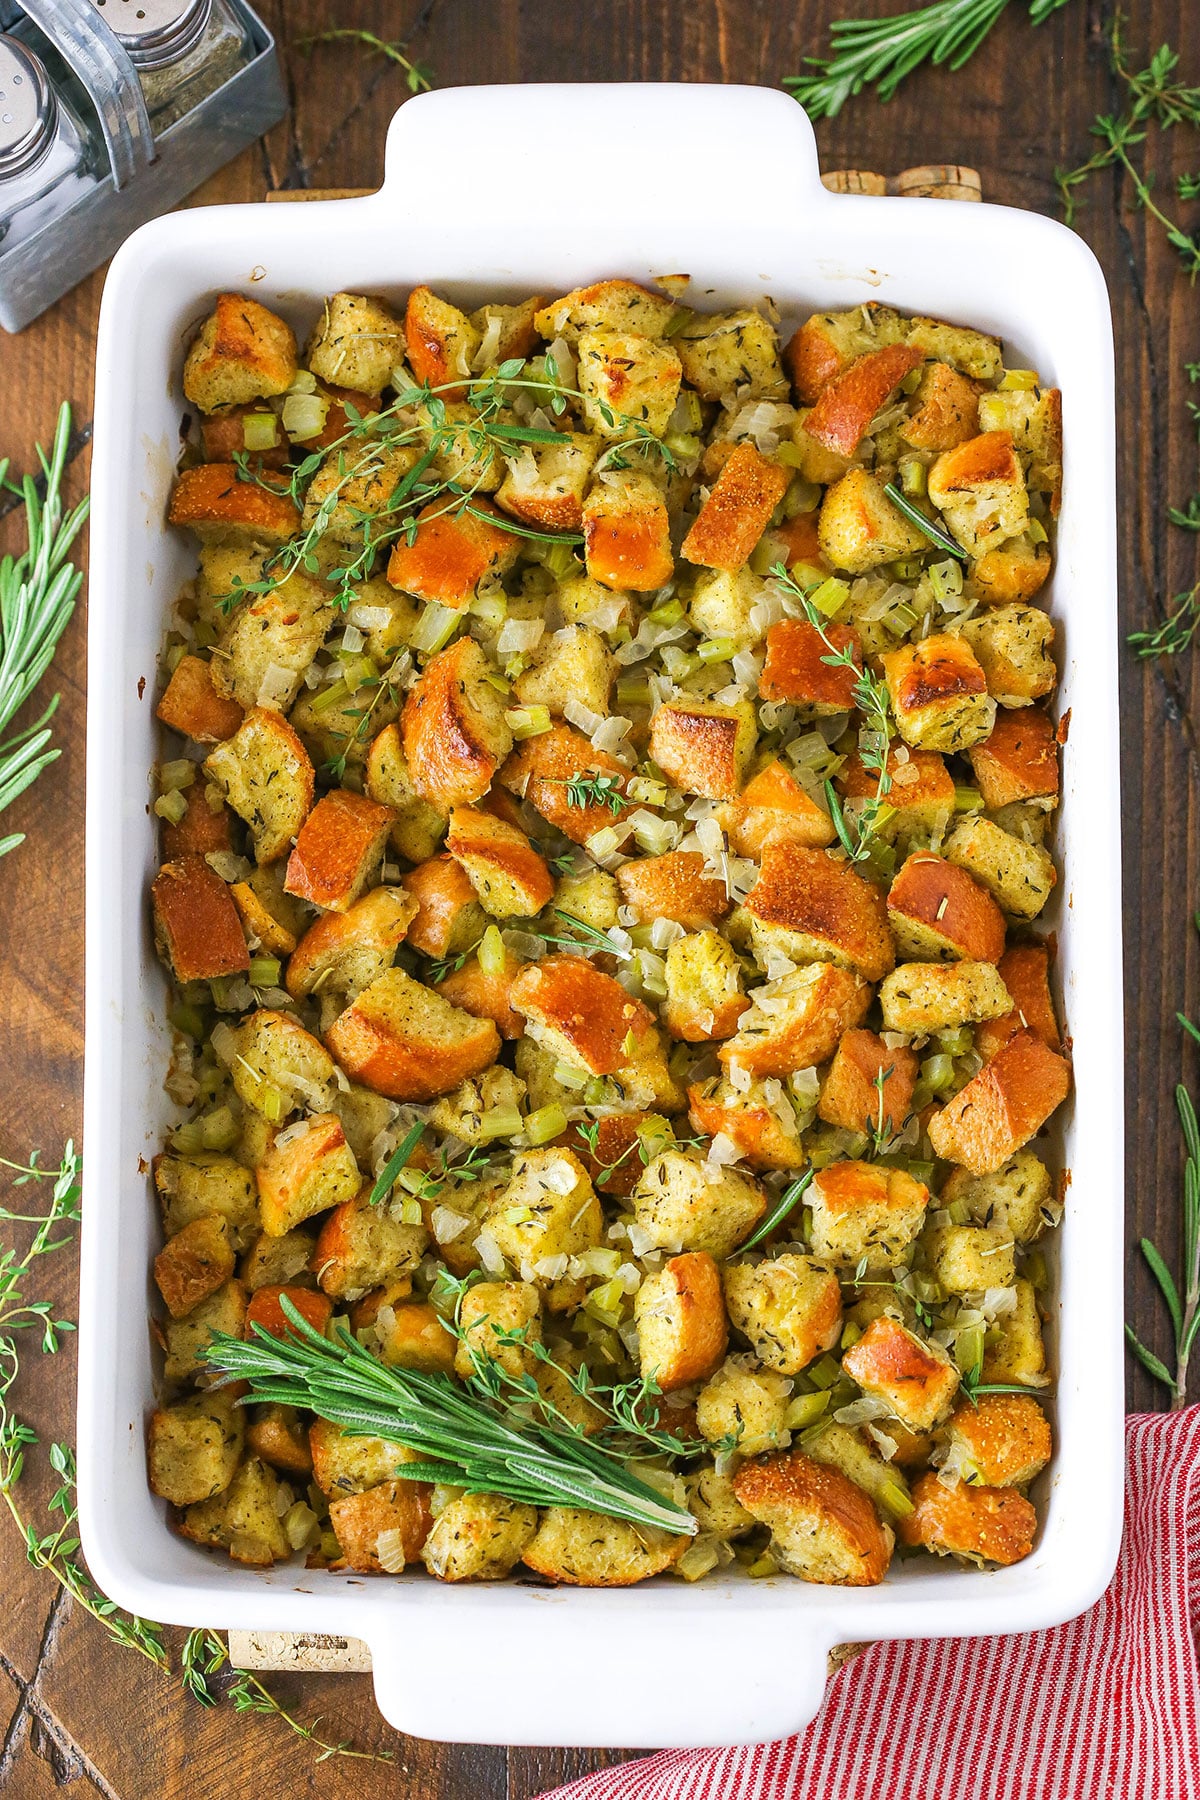 Overhead view of Classic Homemade Stuffing in a white serving platter on a wooden table